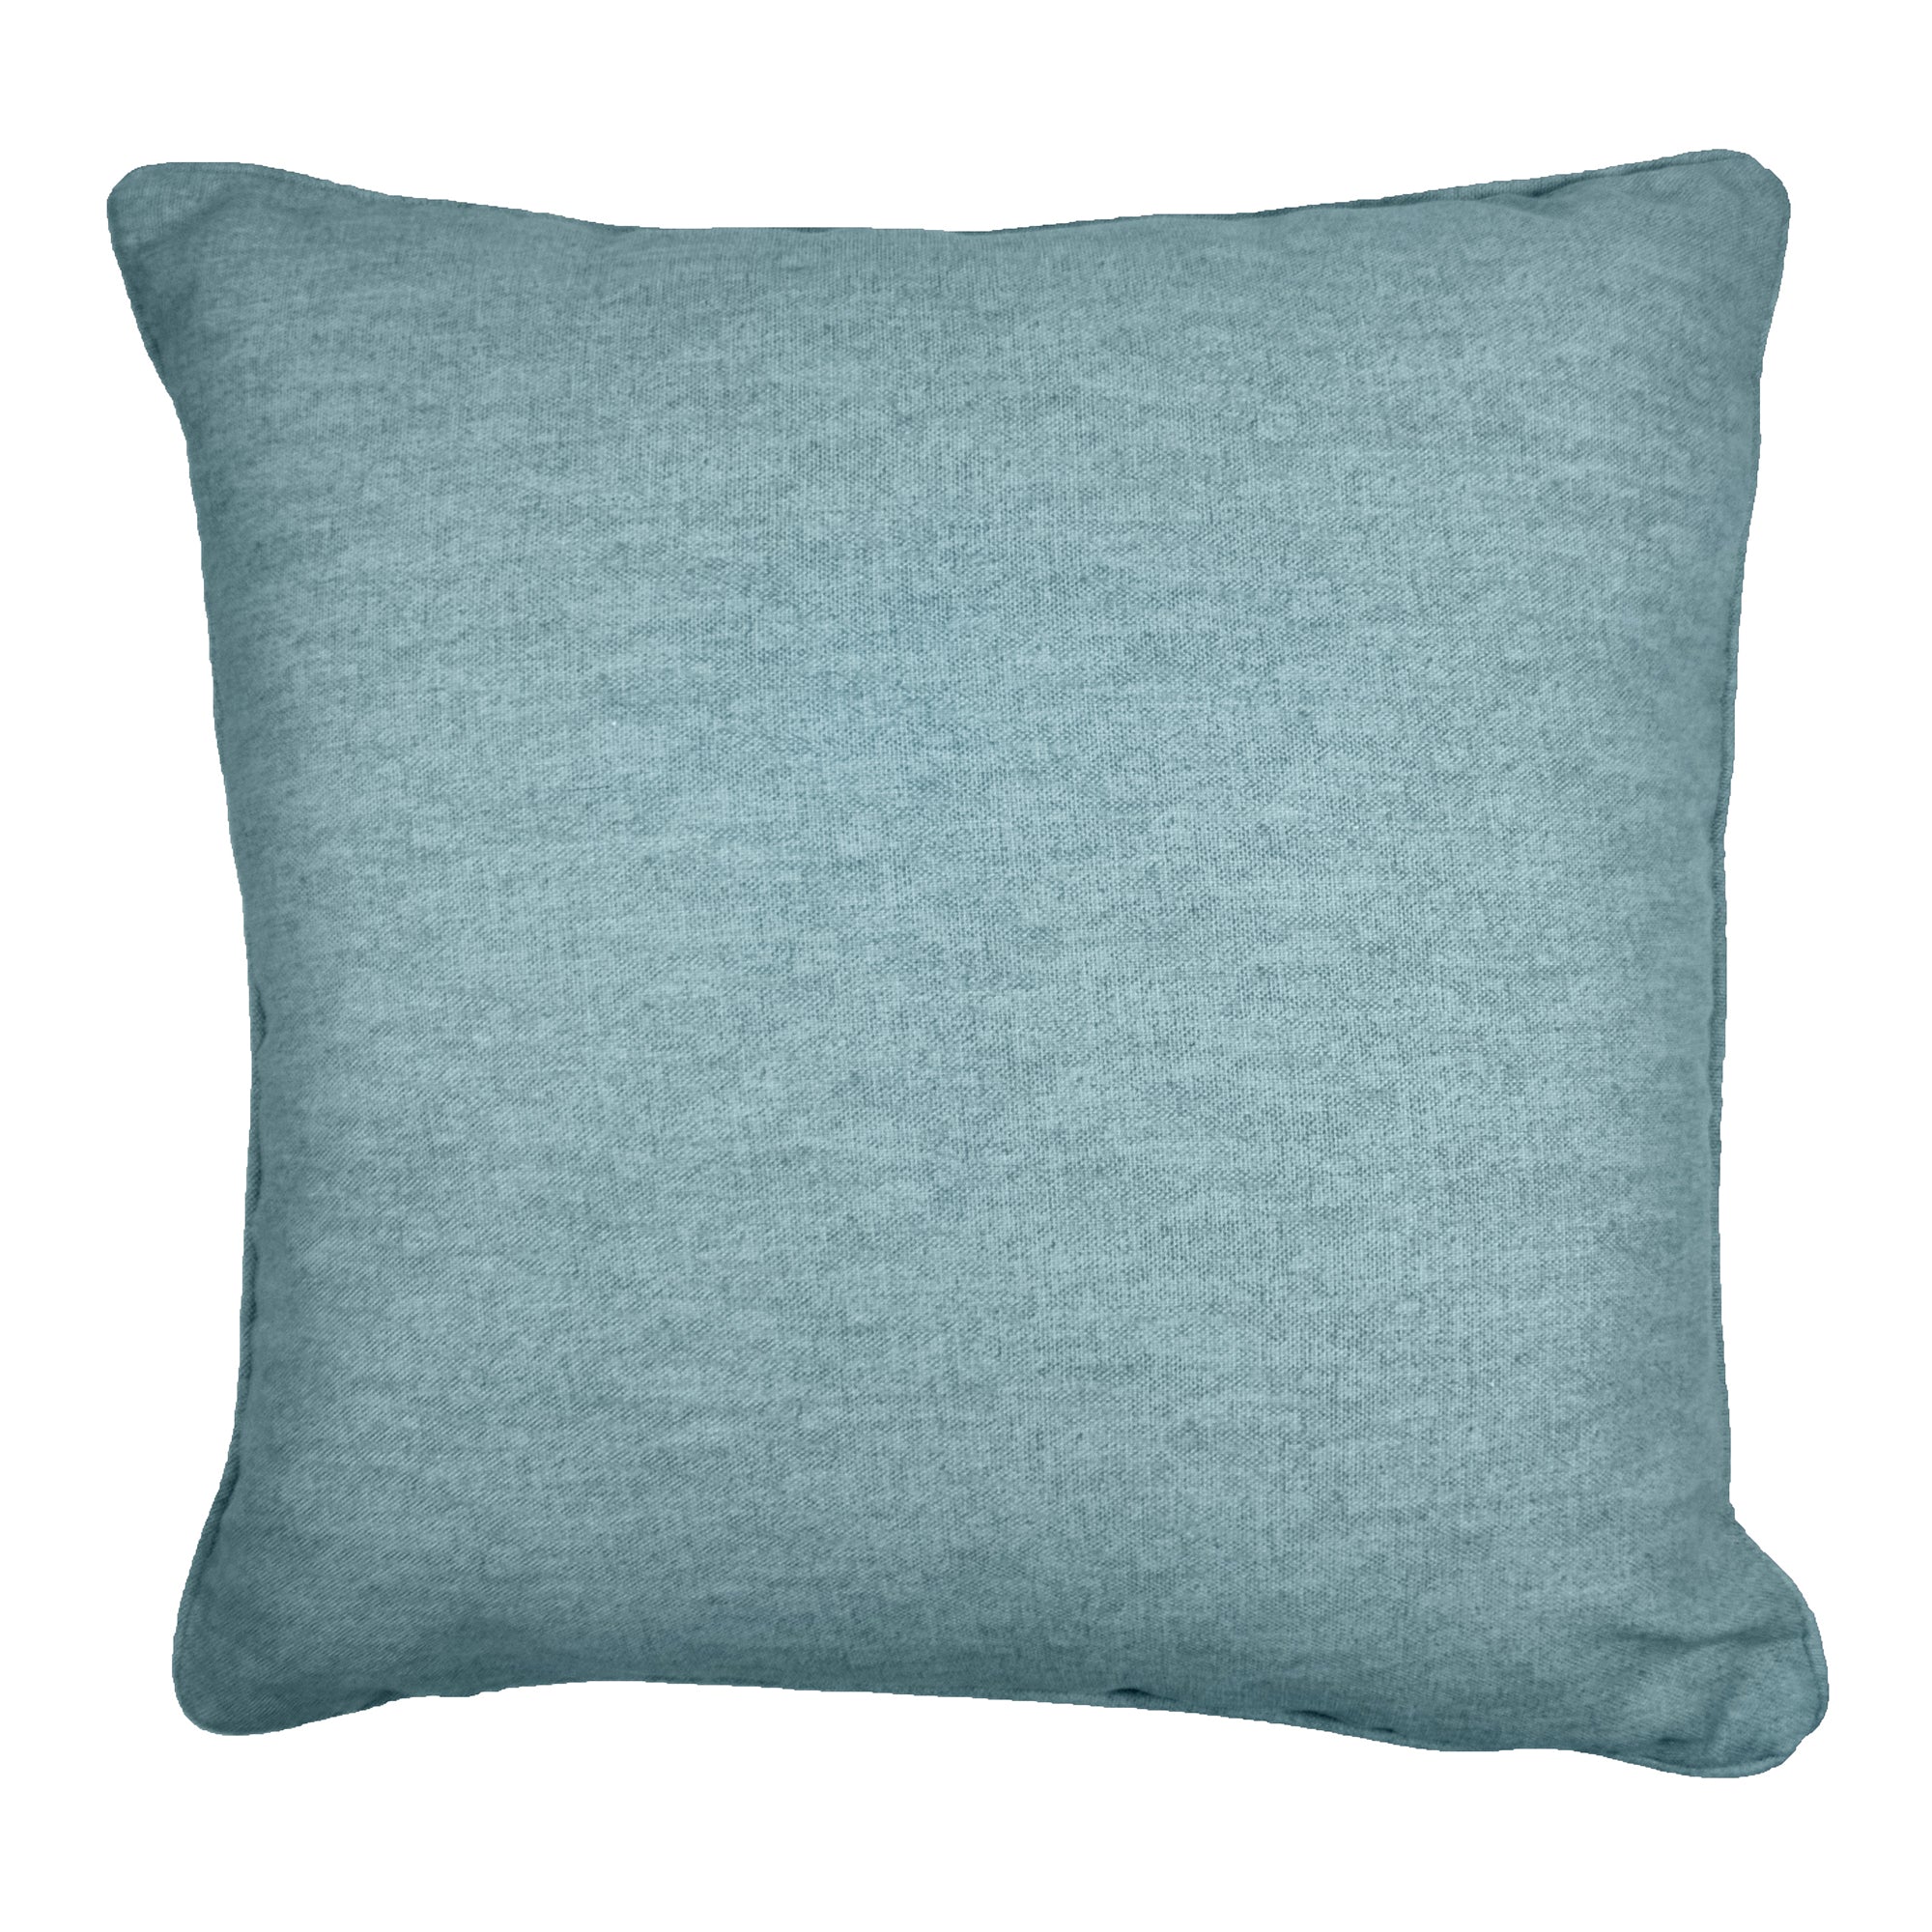 Sorbonne - 100% Cotton Filled Cushion in Duck Egg - by Fusion